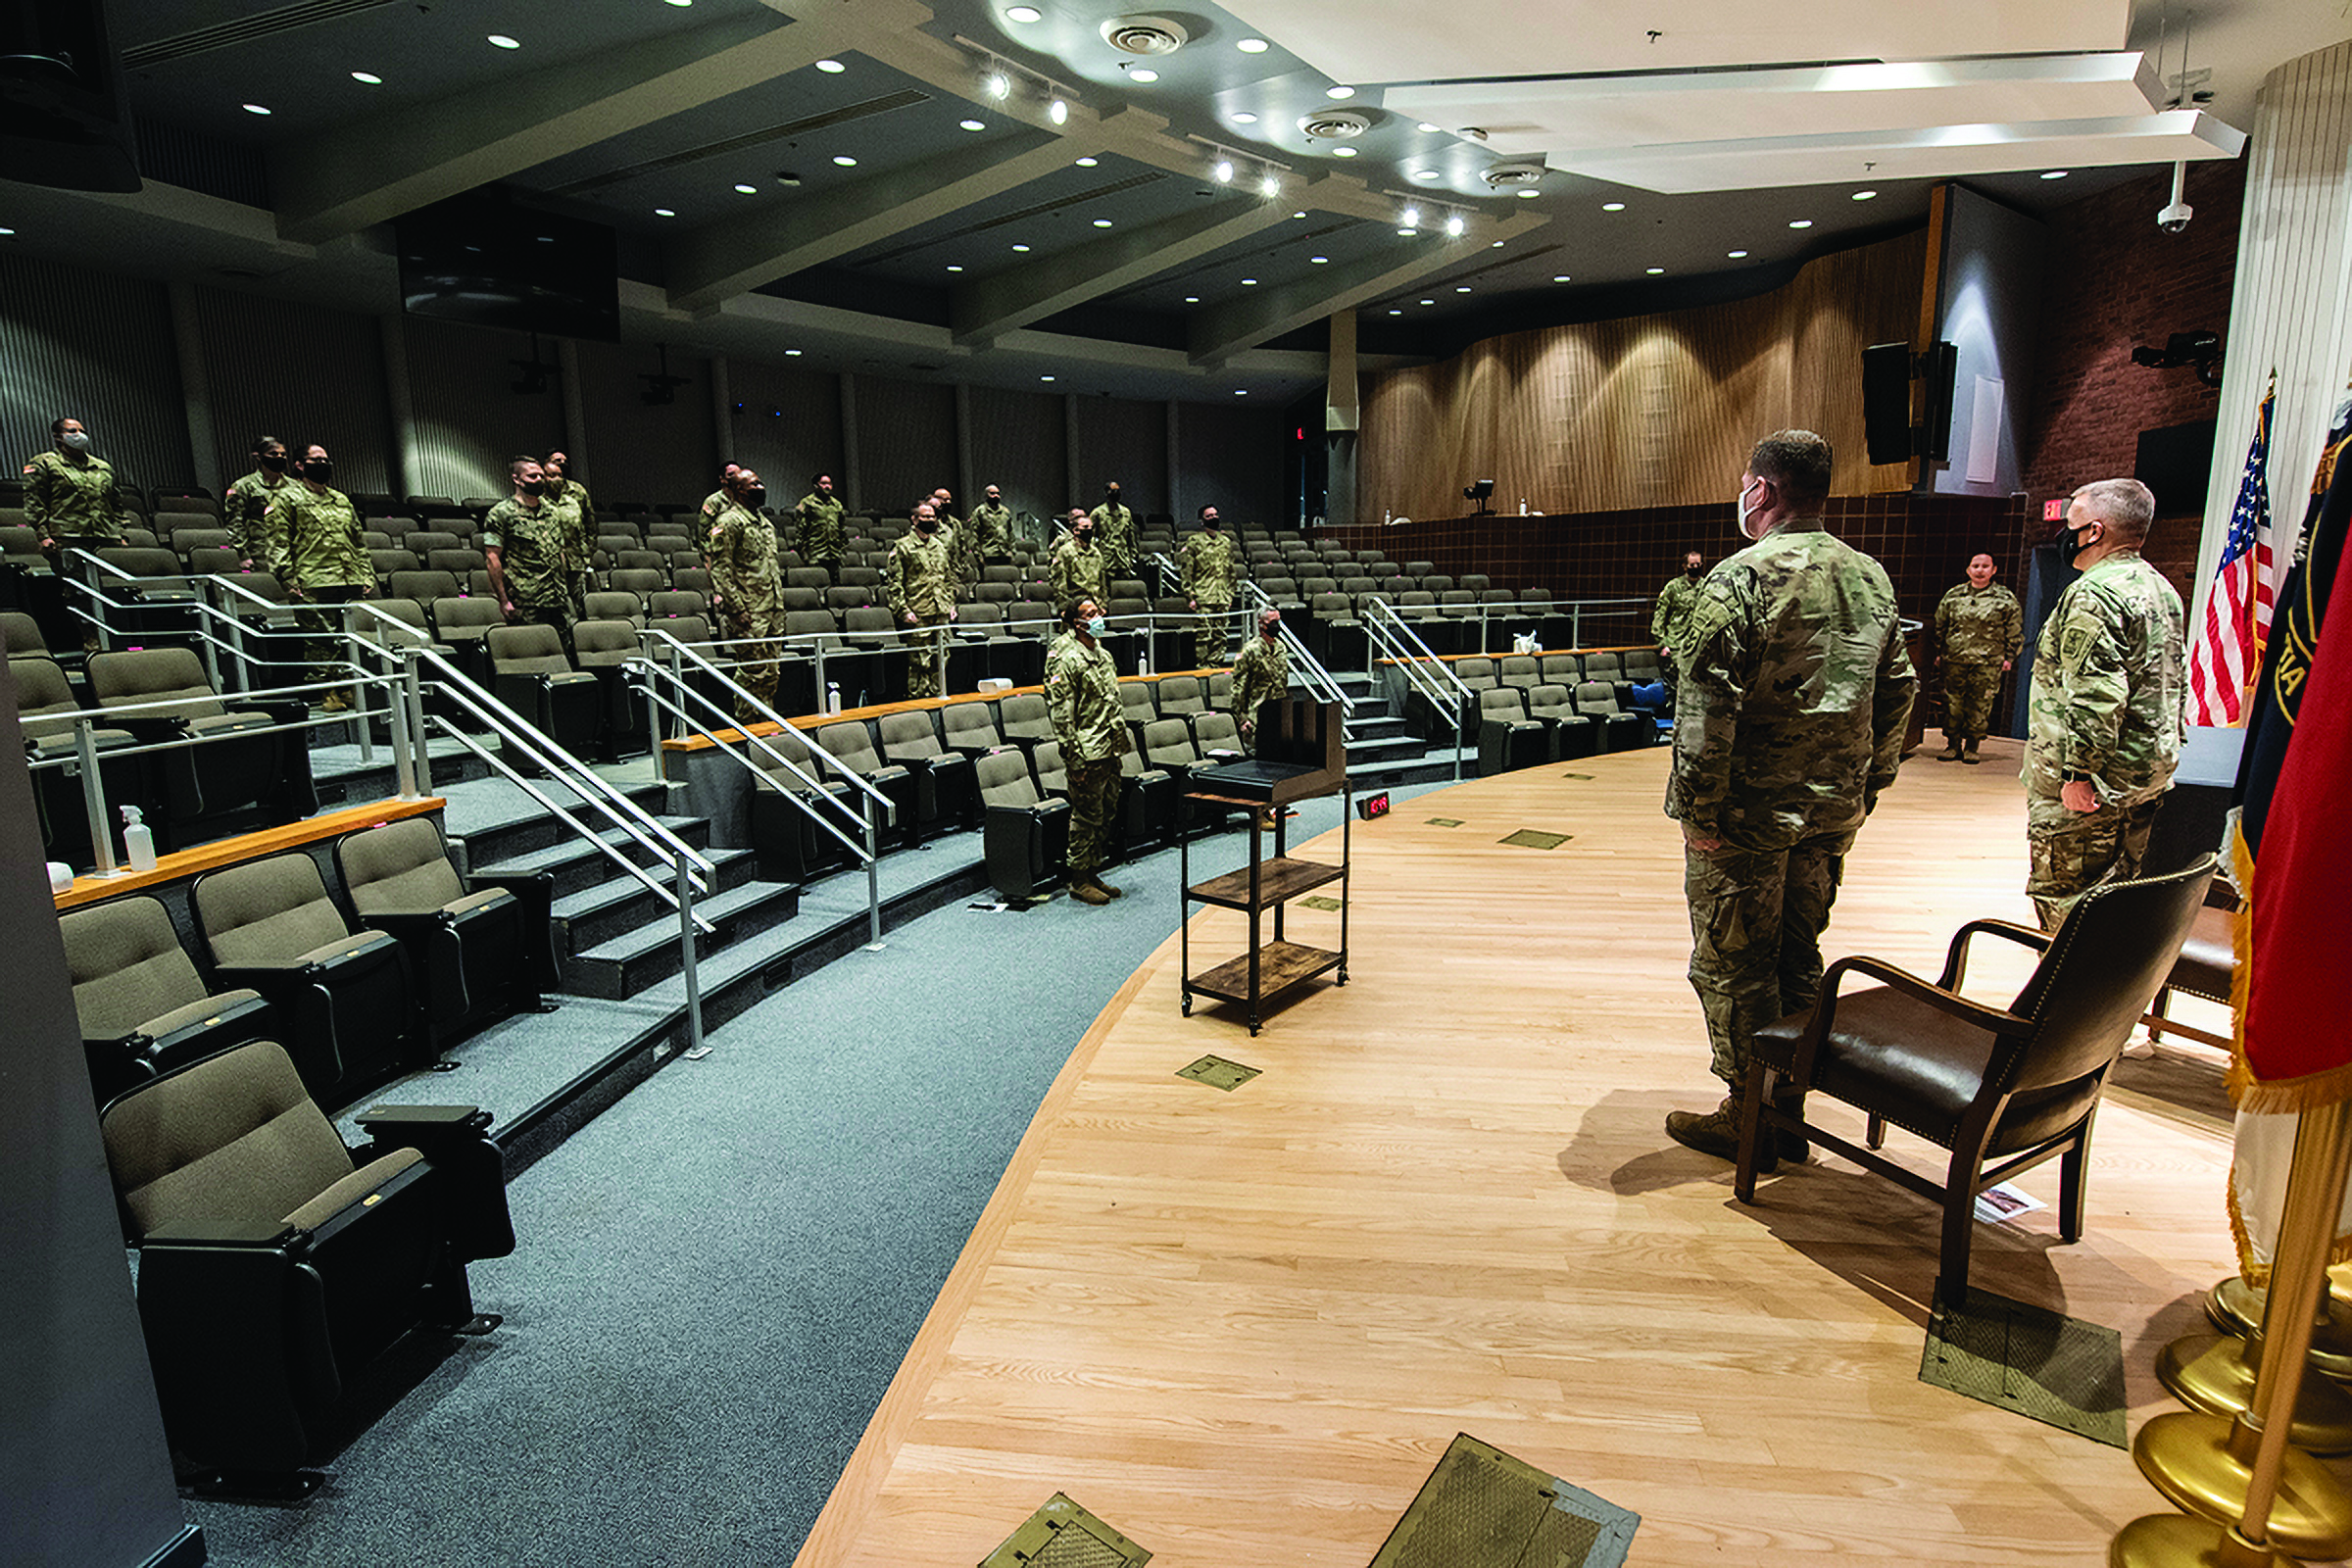 Soldiers wear masks and stand socially-distanced
        during the WOBC graduation ceremony last August
        inside Decker Auditorium at TJAGLCS. (Credit: Jason
        Wilkerson/TJAGLCS)